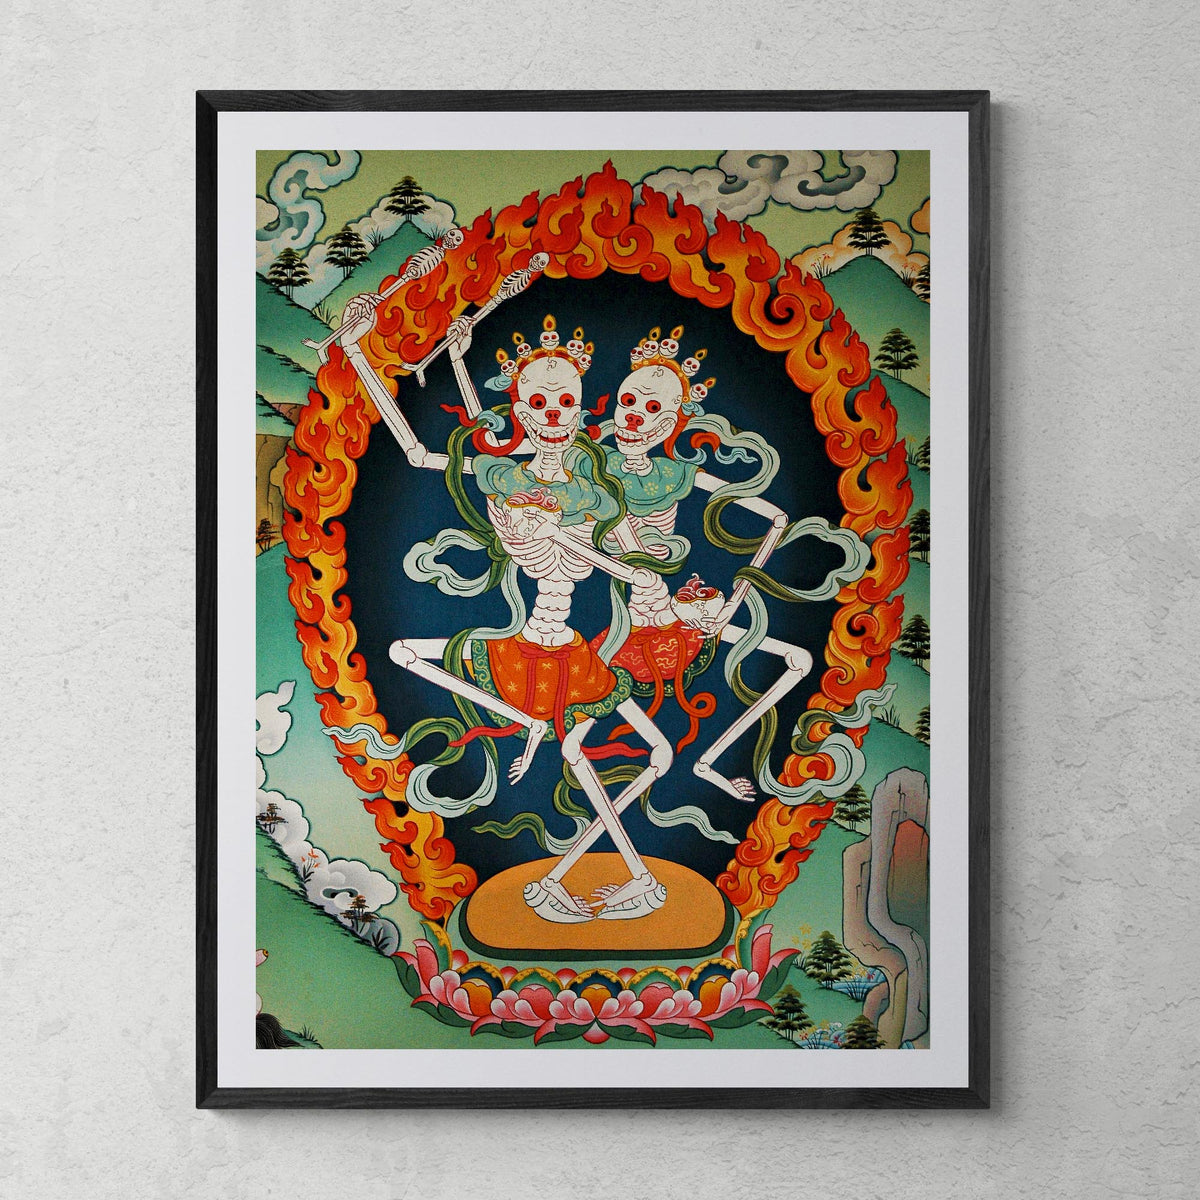 Framed Print 6&quot;x8&quot; / Black Frame Citipati, Tibetan Protector, Thangka, Skeleton Lord and Lady of the Cemetery Nepal Buddhist Decor Wall Art Framed Art Print